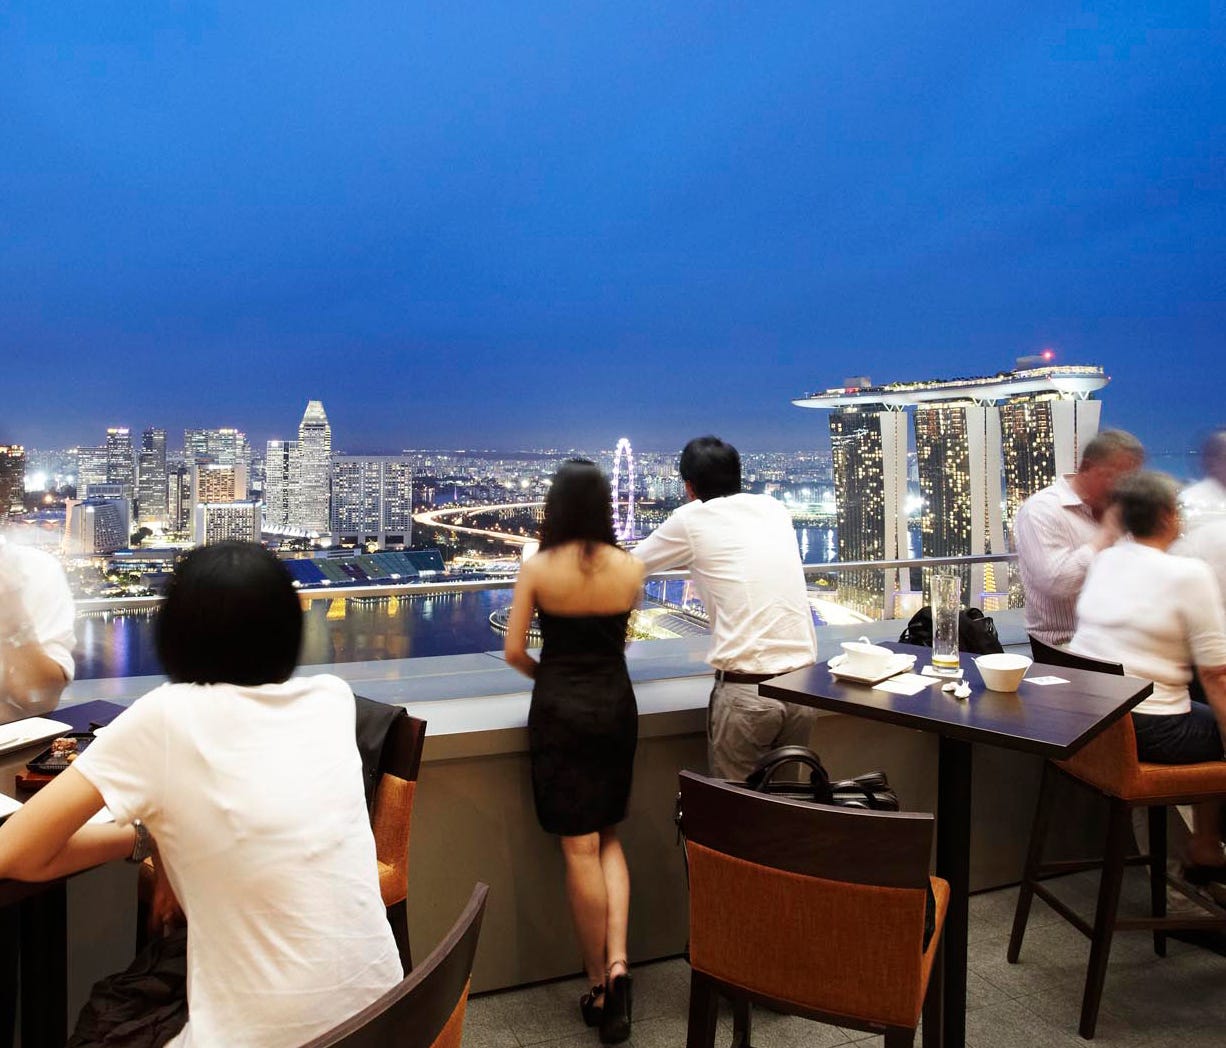 Brewery and restaurant LeVeL33 in Singapore has set up shop on the 33rd floor of a financial tower in a penthouse, offering visitors sweeping city and bay views.